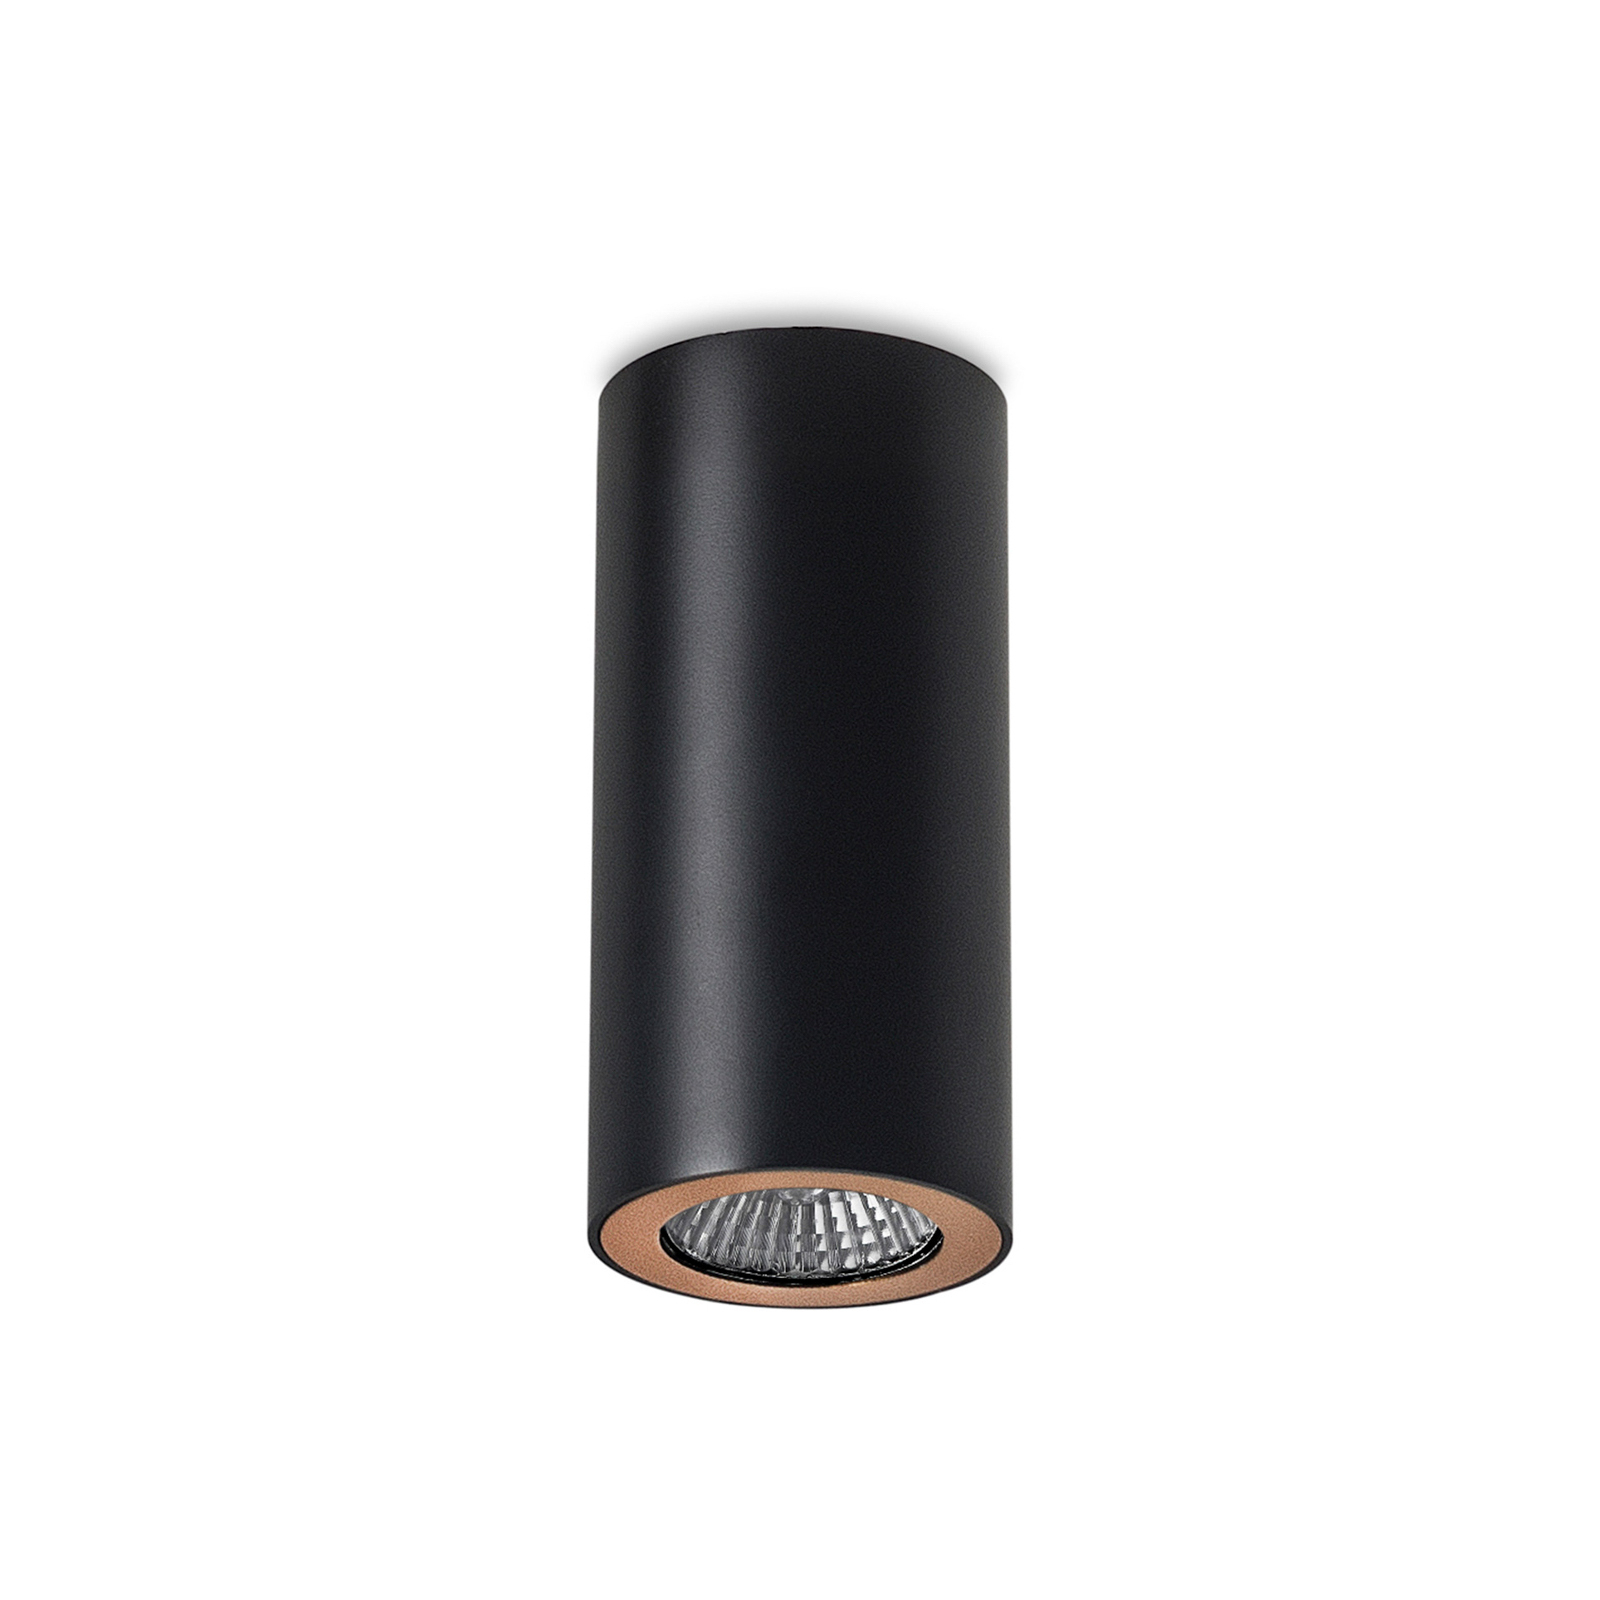 LEDS-C4 Pipe downlight one-bulb black and gold